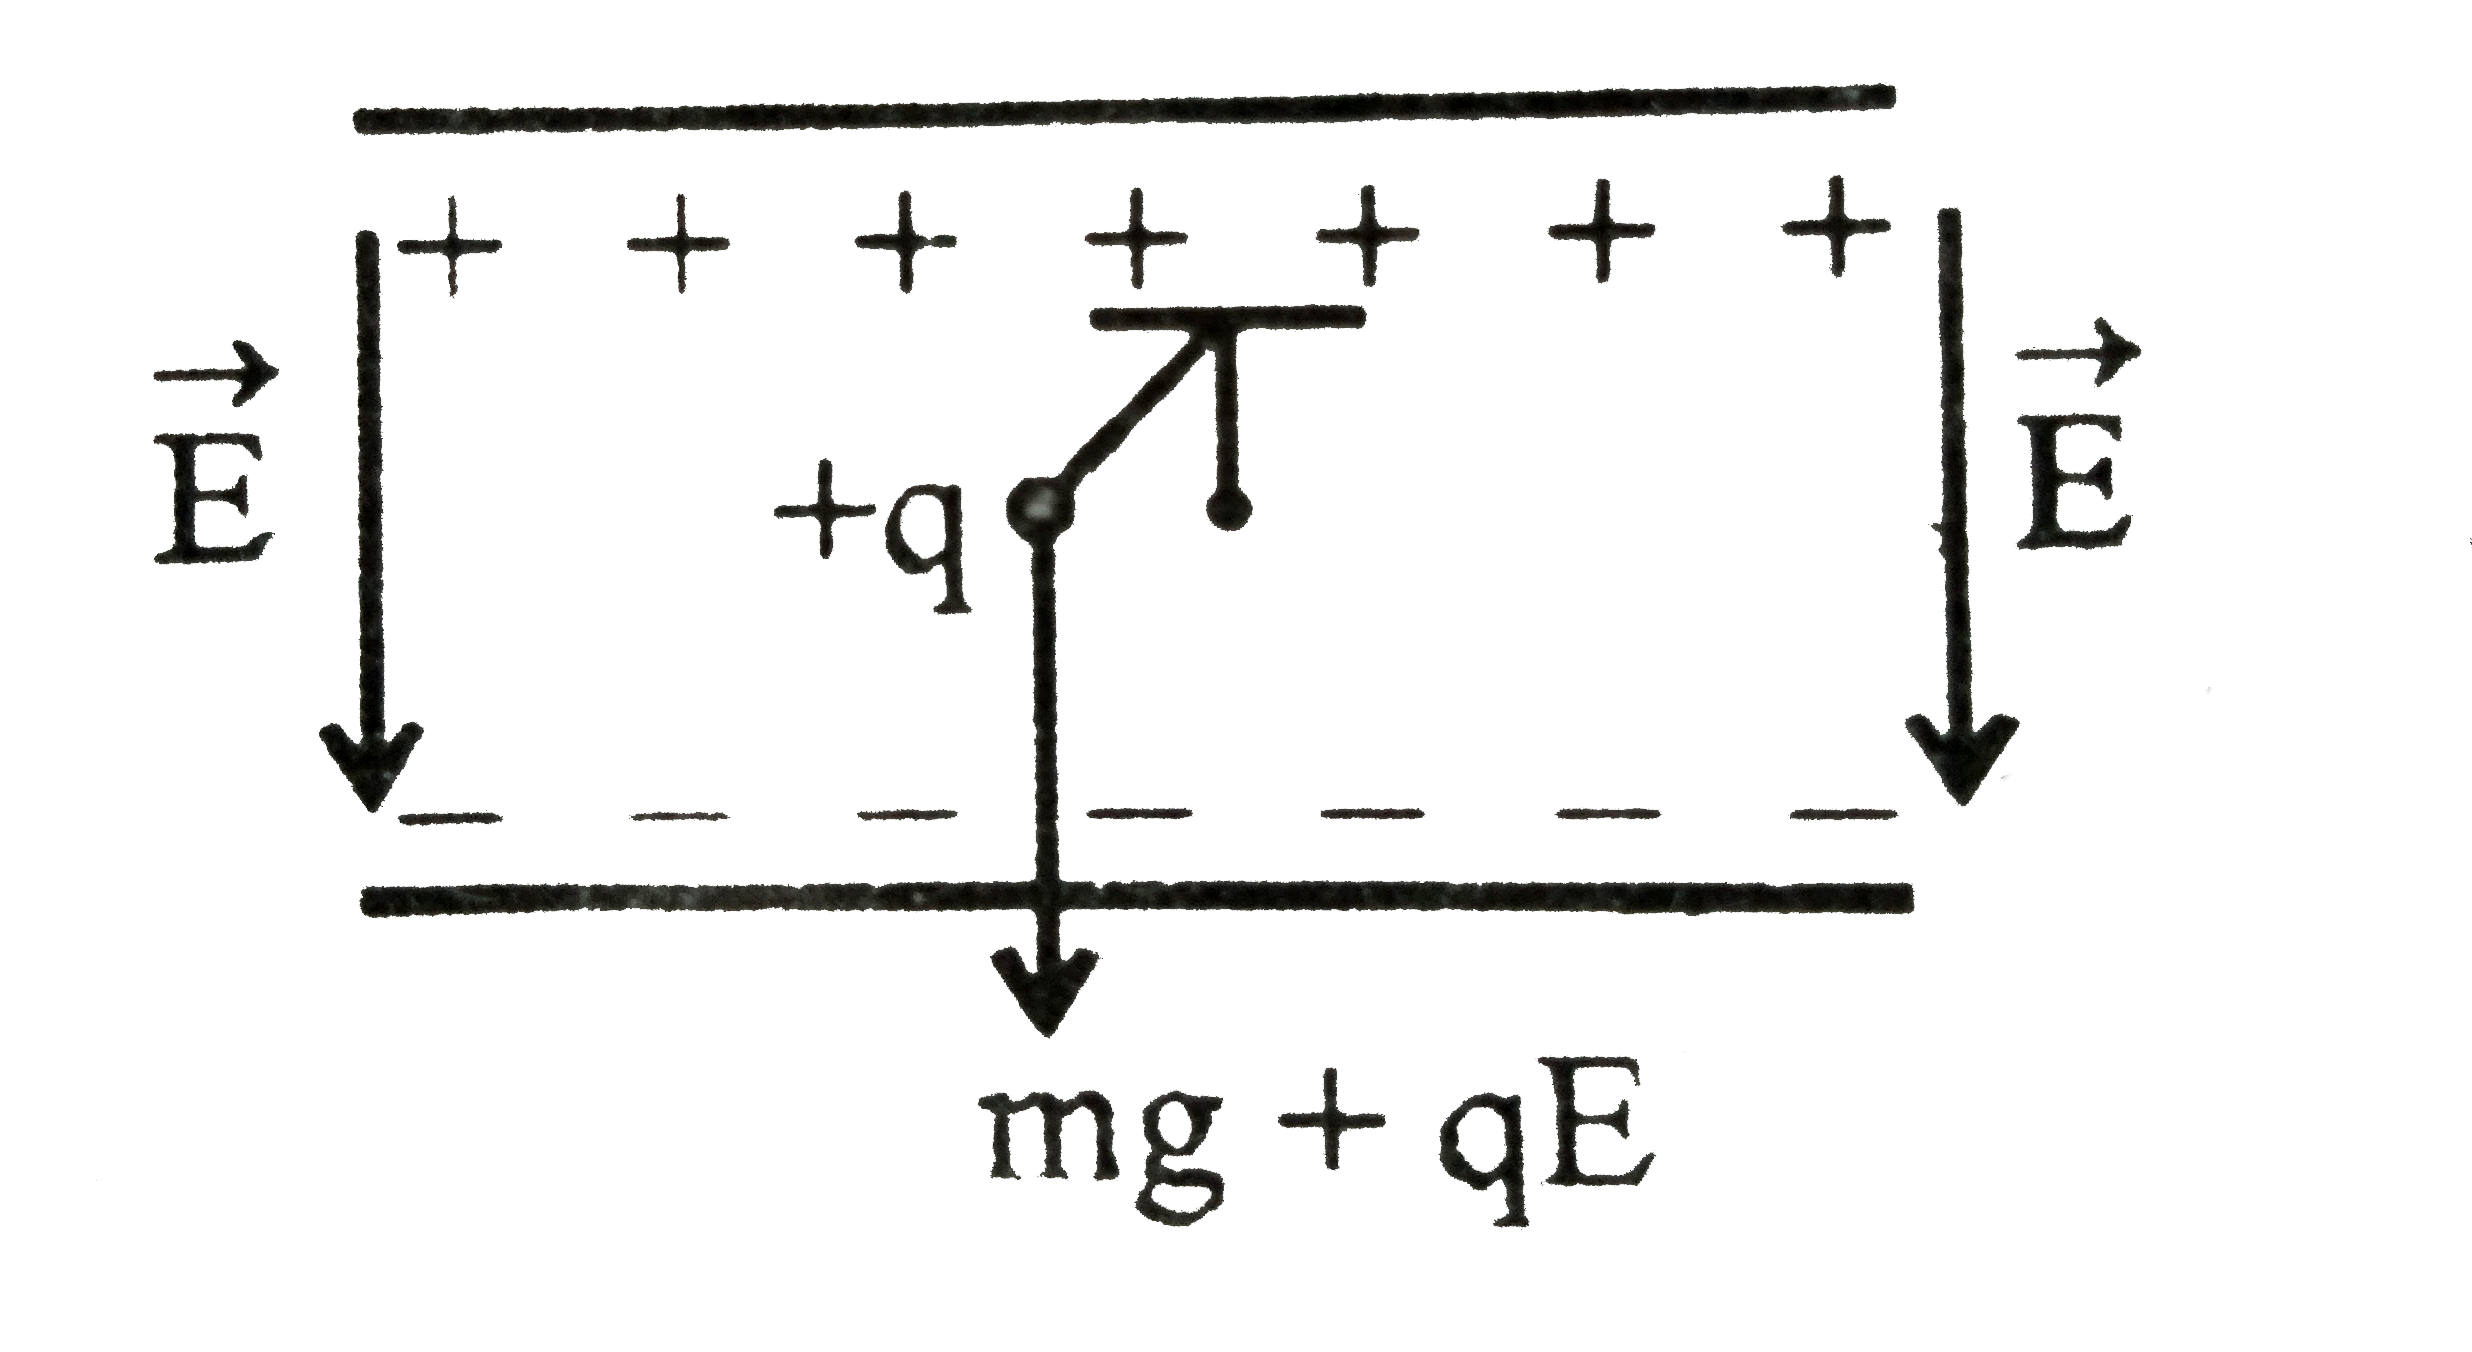 A simple pendulum having caharge  q1 mass ma and effective length 1, is suspended from a rigid support between the plates of charged horizontal capacitor. Electric field in the capacitor is perpendicular to the plates and directed vertically downwards .      the angle  alpha between the equilibrium position of the pendulum and the vertical is given by.